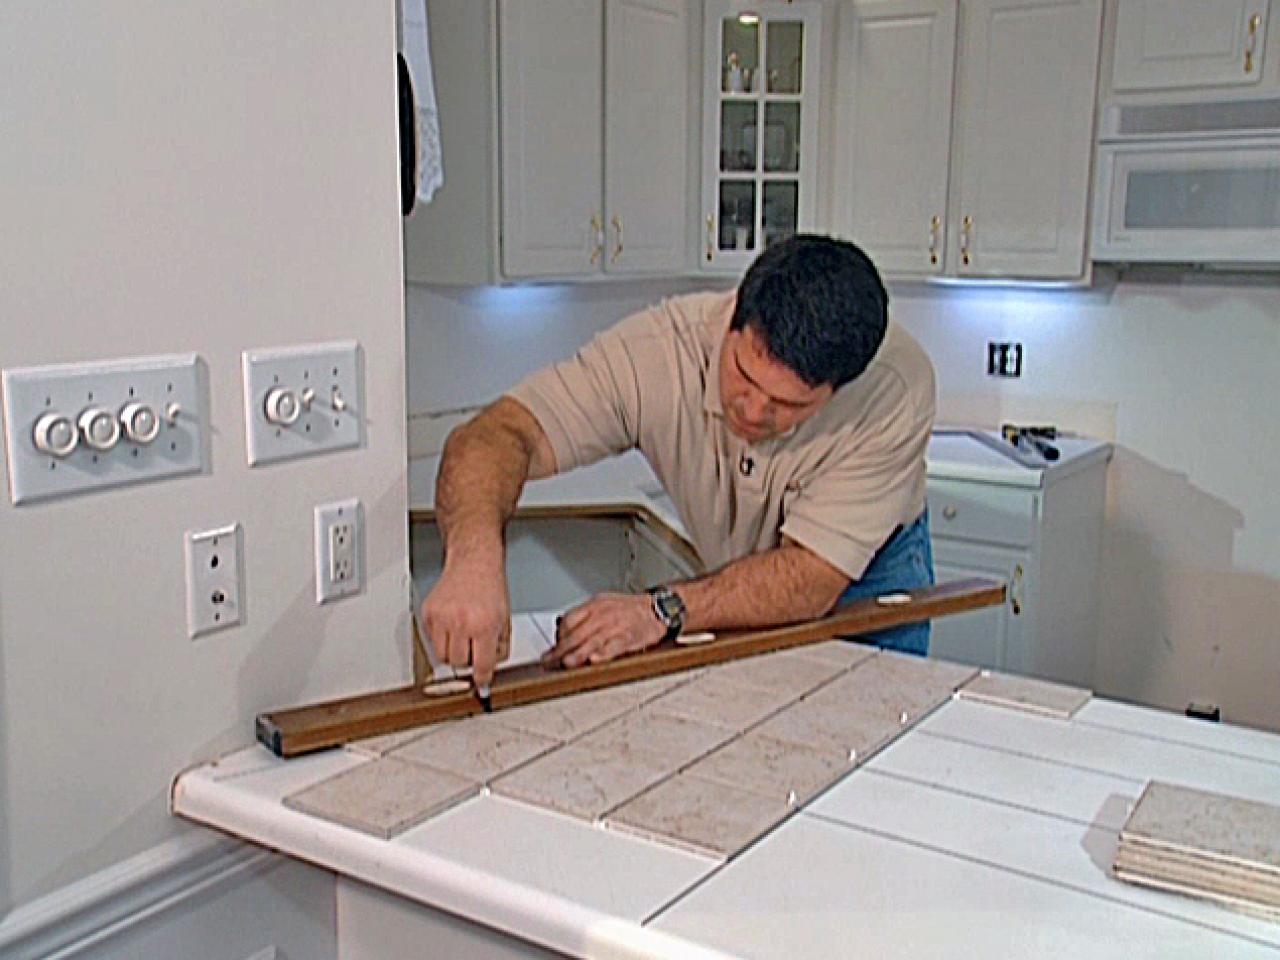 Install Tile Over Laminate Countertop, How To Cover Up Old Tile Countertops